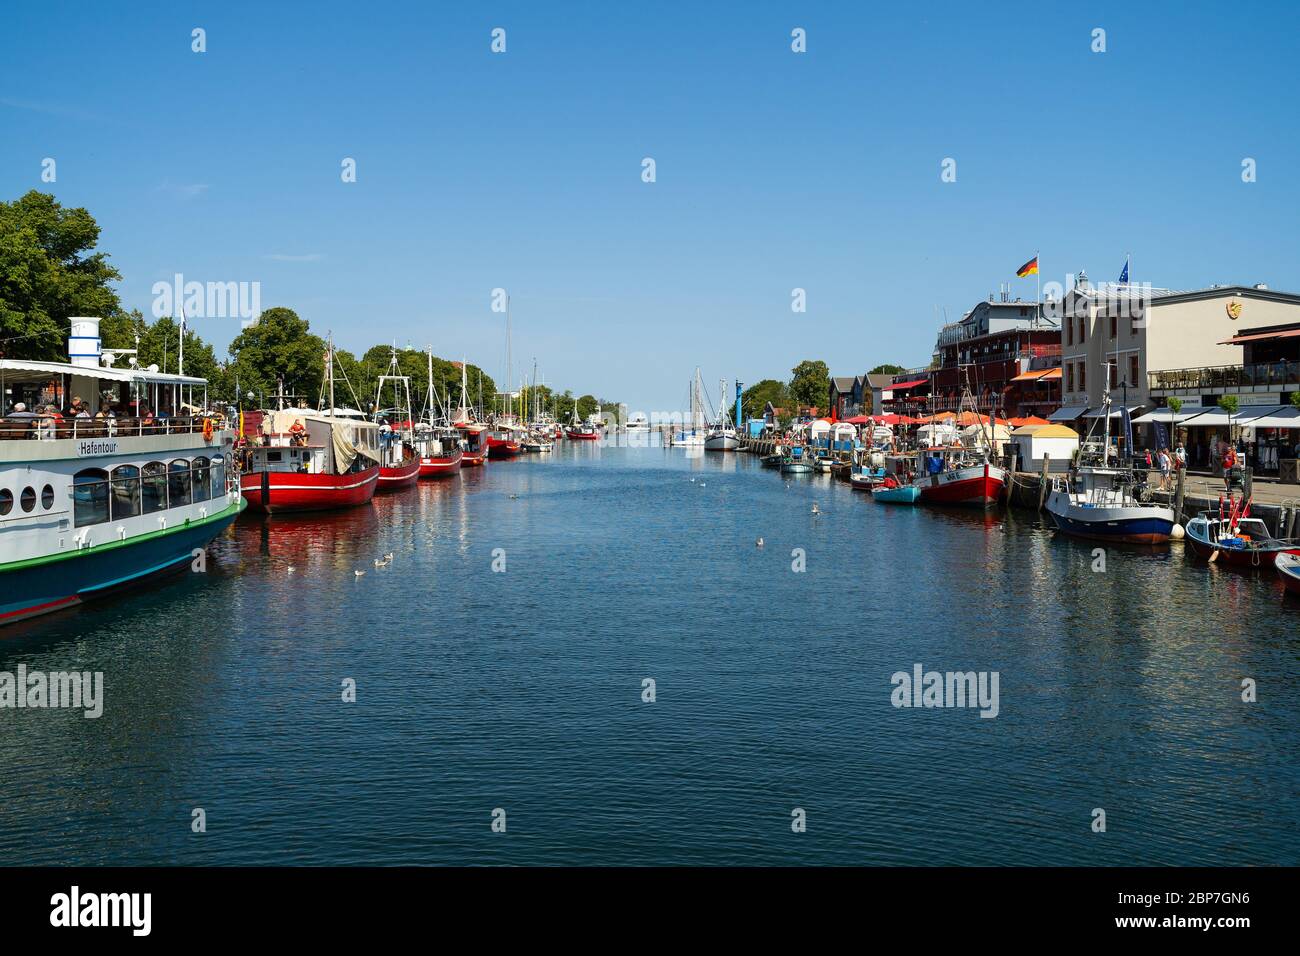 WARNEMUENDE (ROSTOCK), GERMANY - JULY 25, 2019: The view of the berths for ships and the historic quarter of Rostock - Warnemuende. Stock Photo